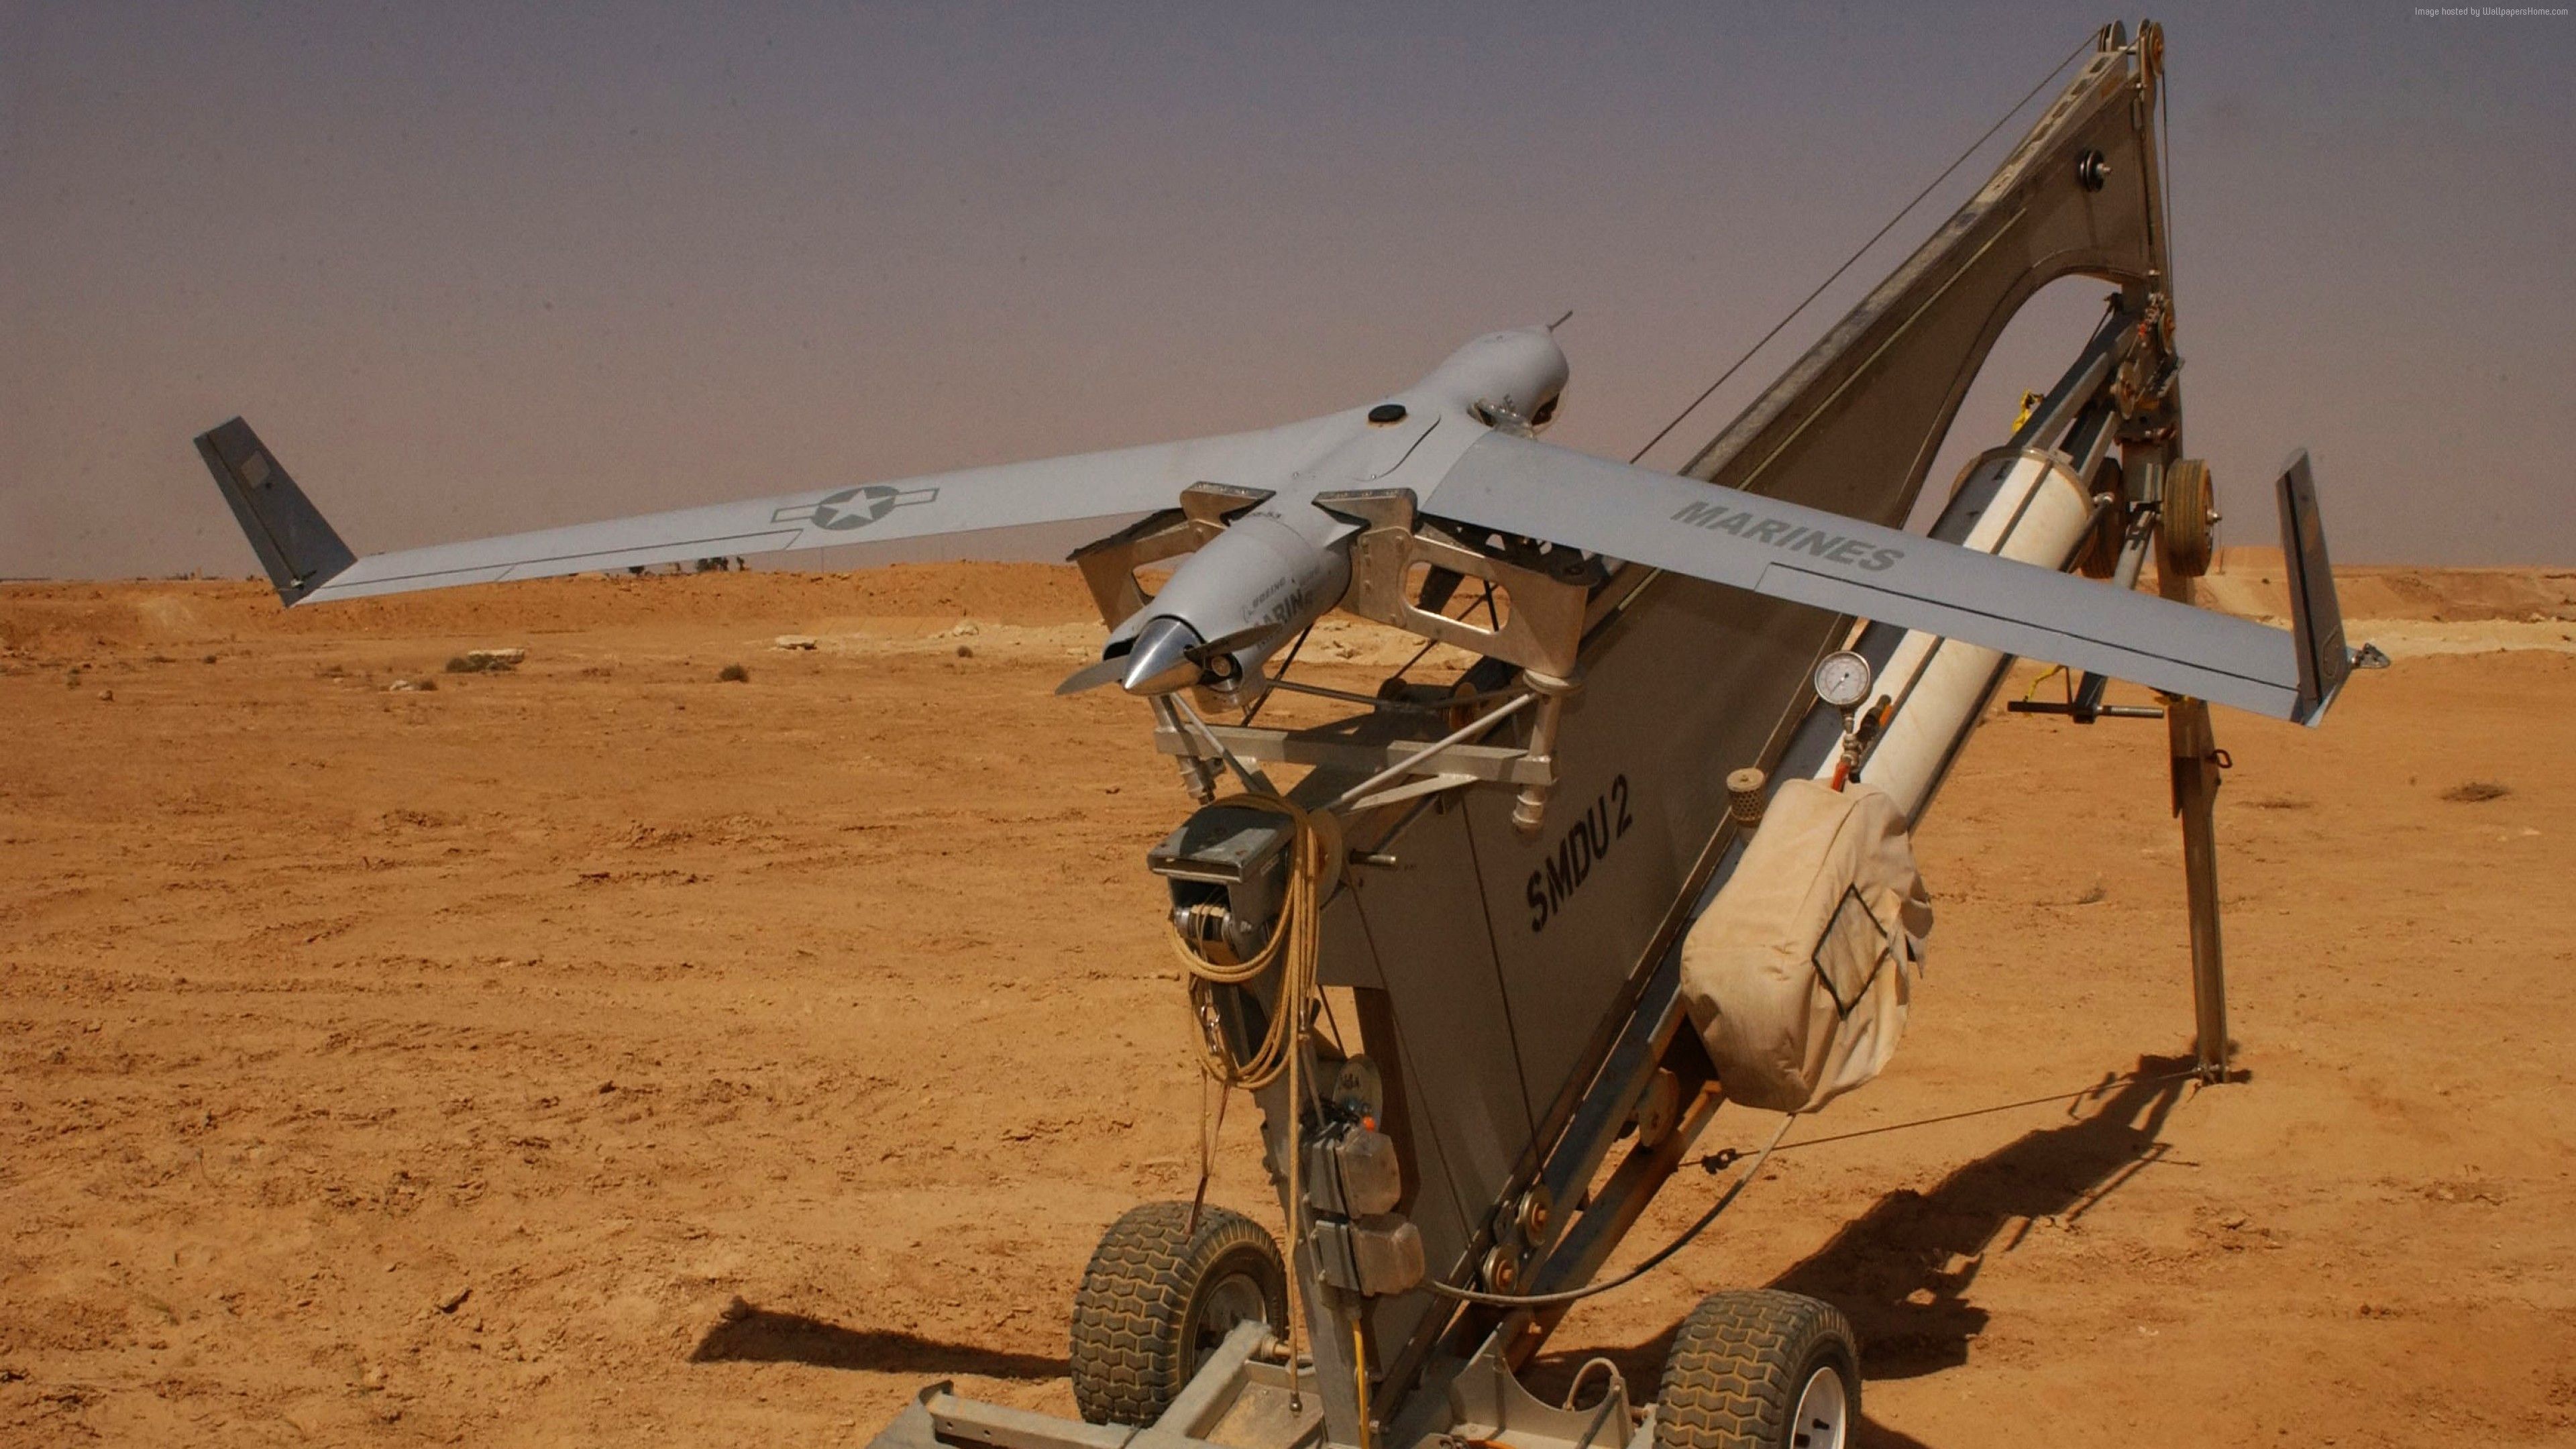 Wallpaper ScanEagle, drone, UAV, U.S. Army, U.S. Air Force, Military Wallpaper Download. Uav, Unmanned systems